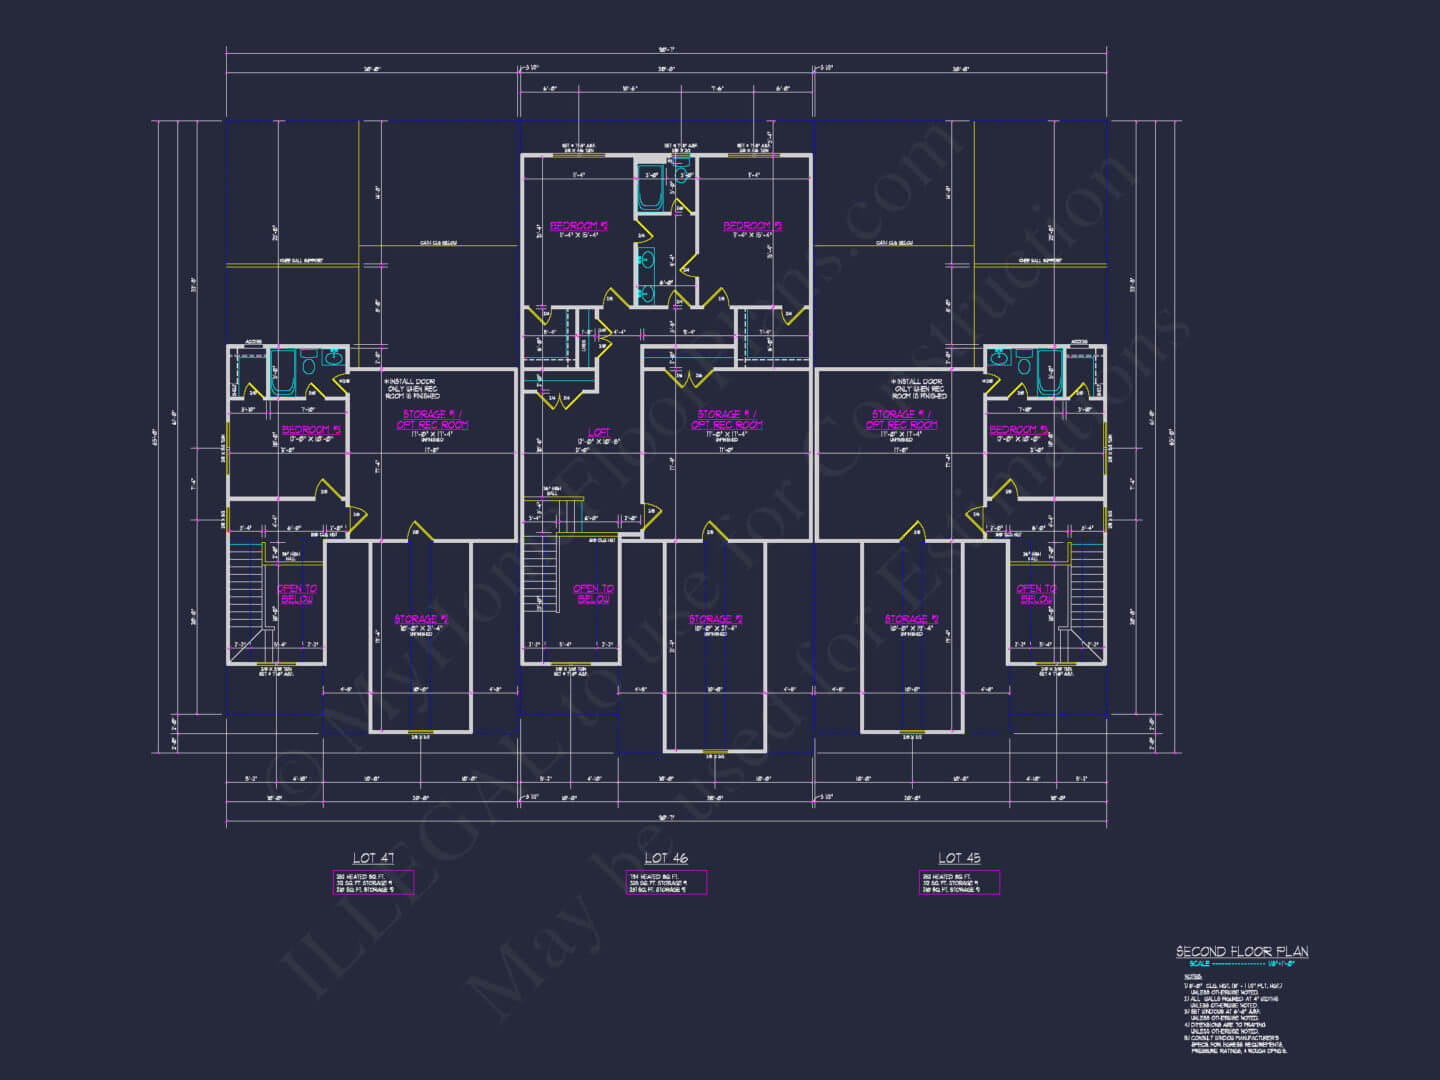 15-1173-2 triplex apartment condo townhome MY HOME FLOOR PLANS_Page_08